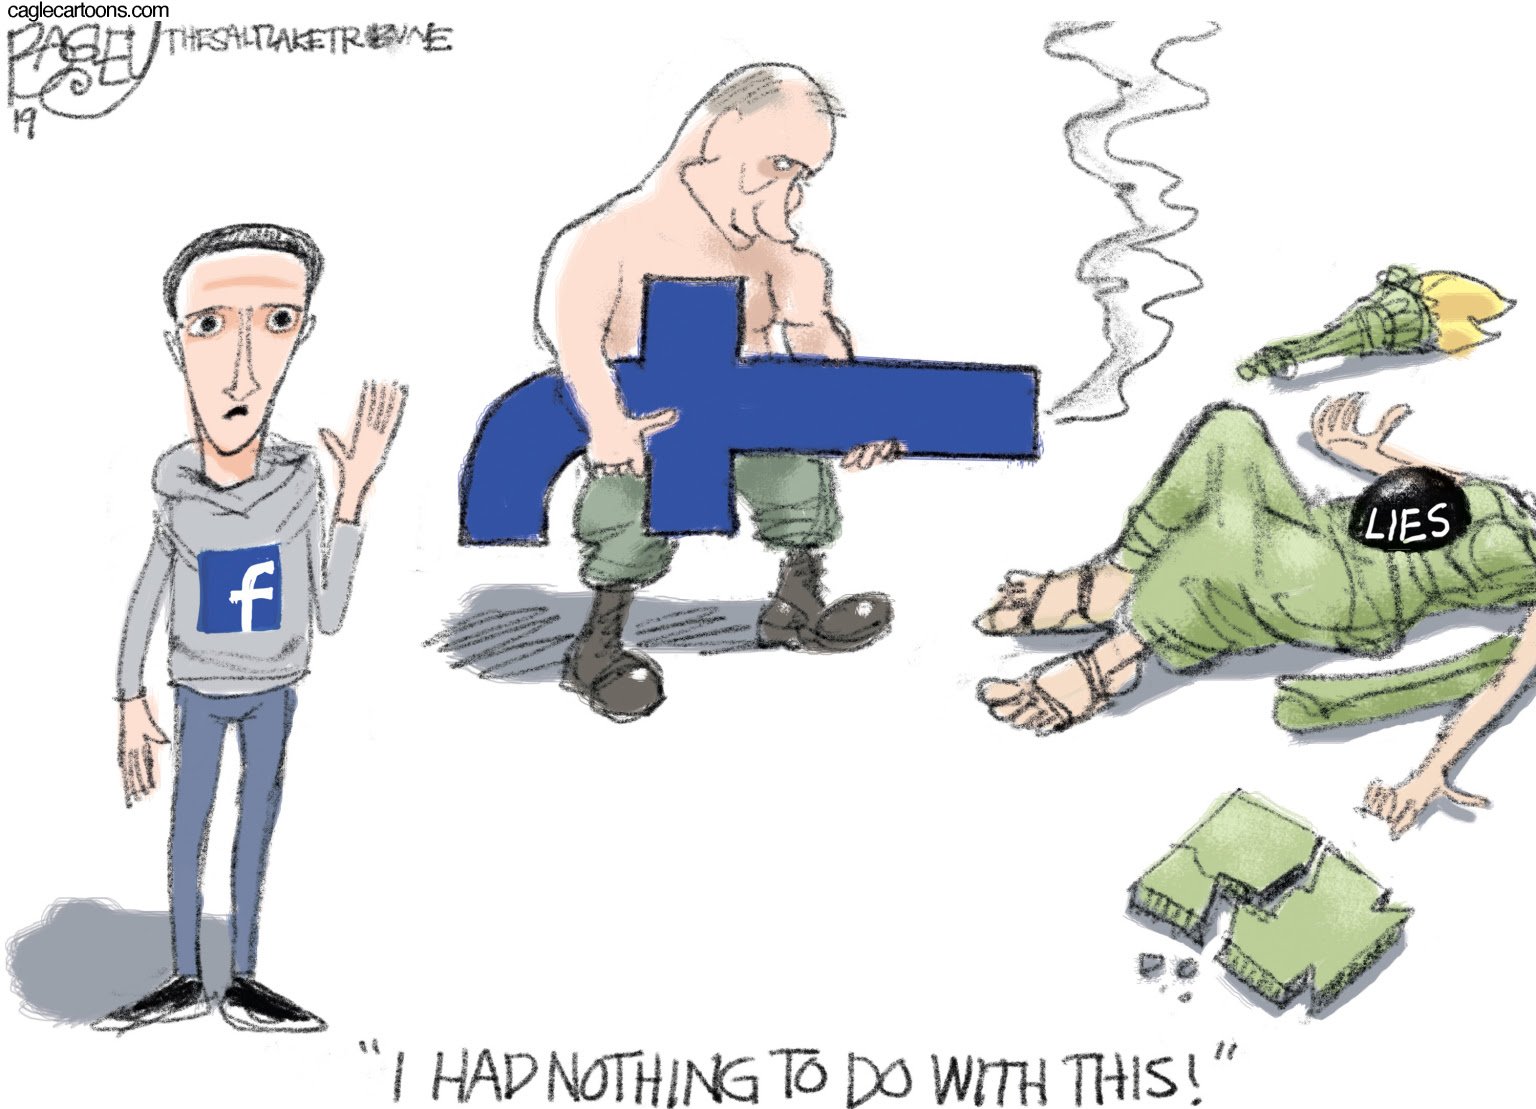 Facebook helps Putin and Russia spread misinfo